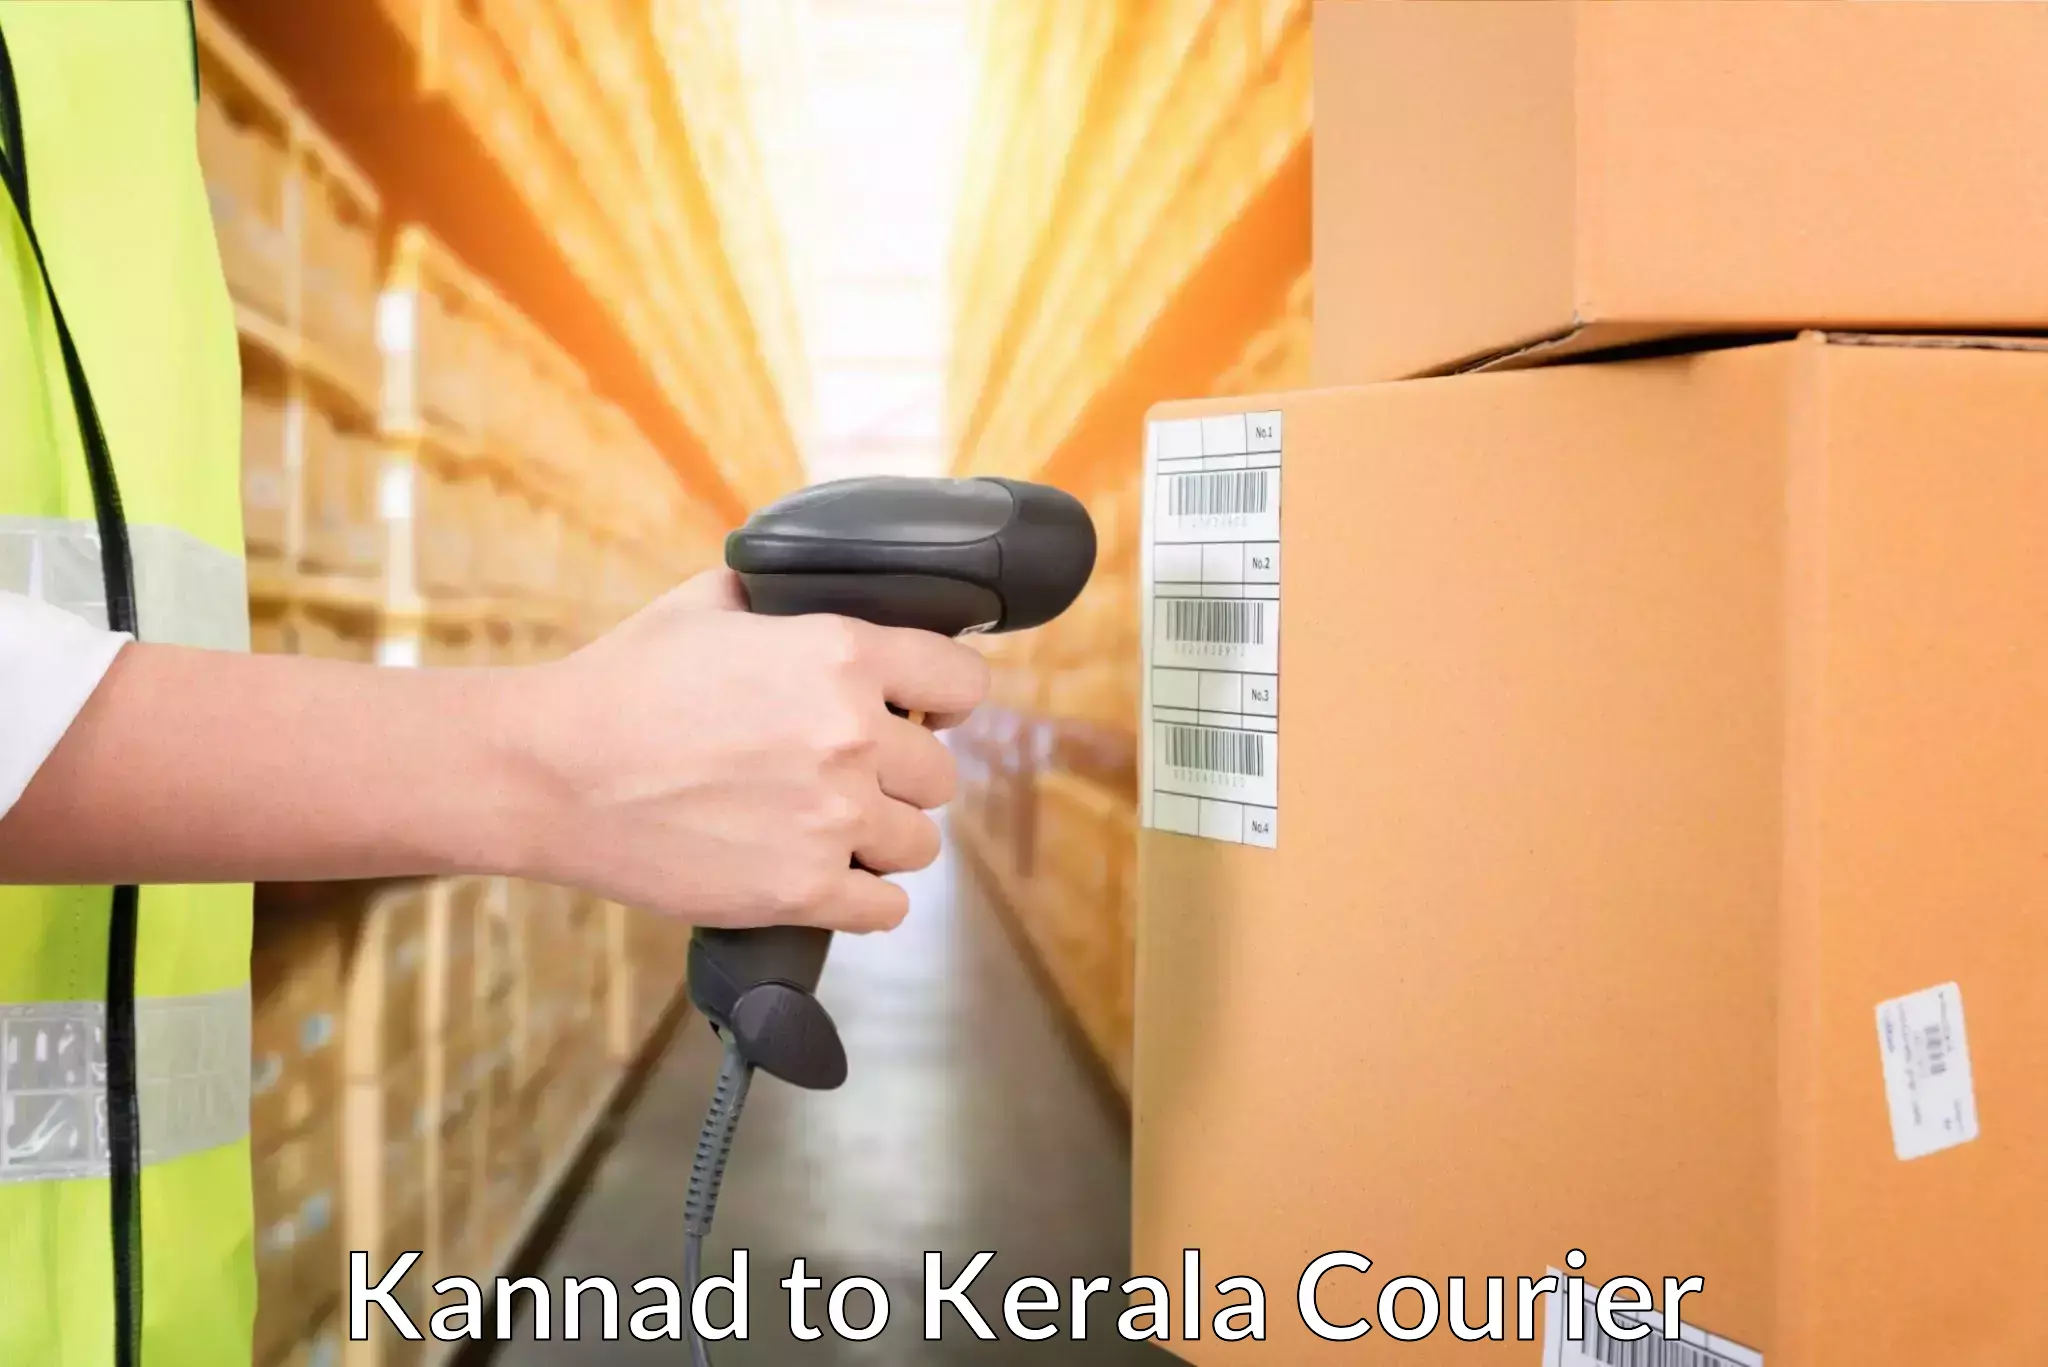 Parcel service for businesses Kannad to Cochin Port Kochi